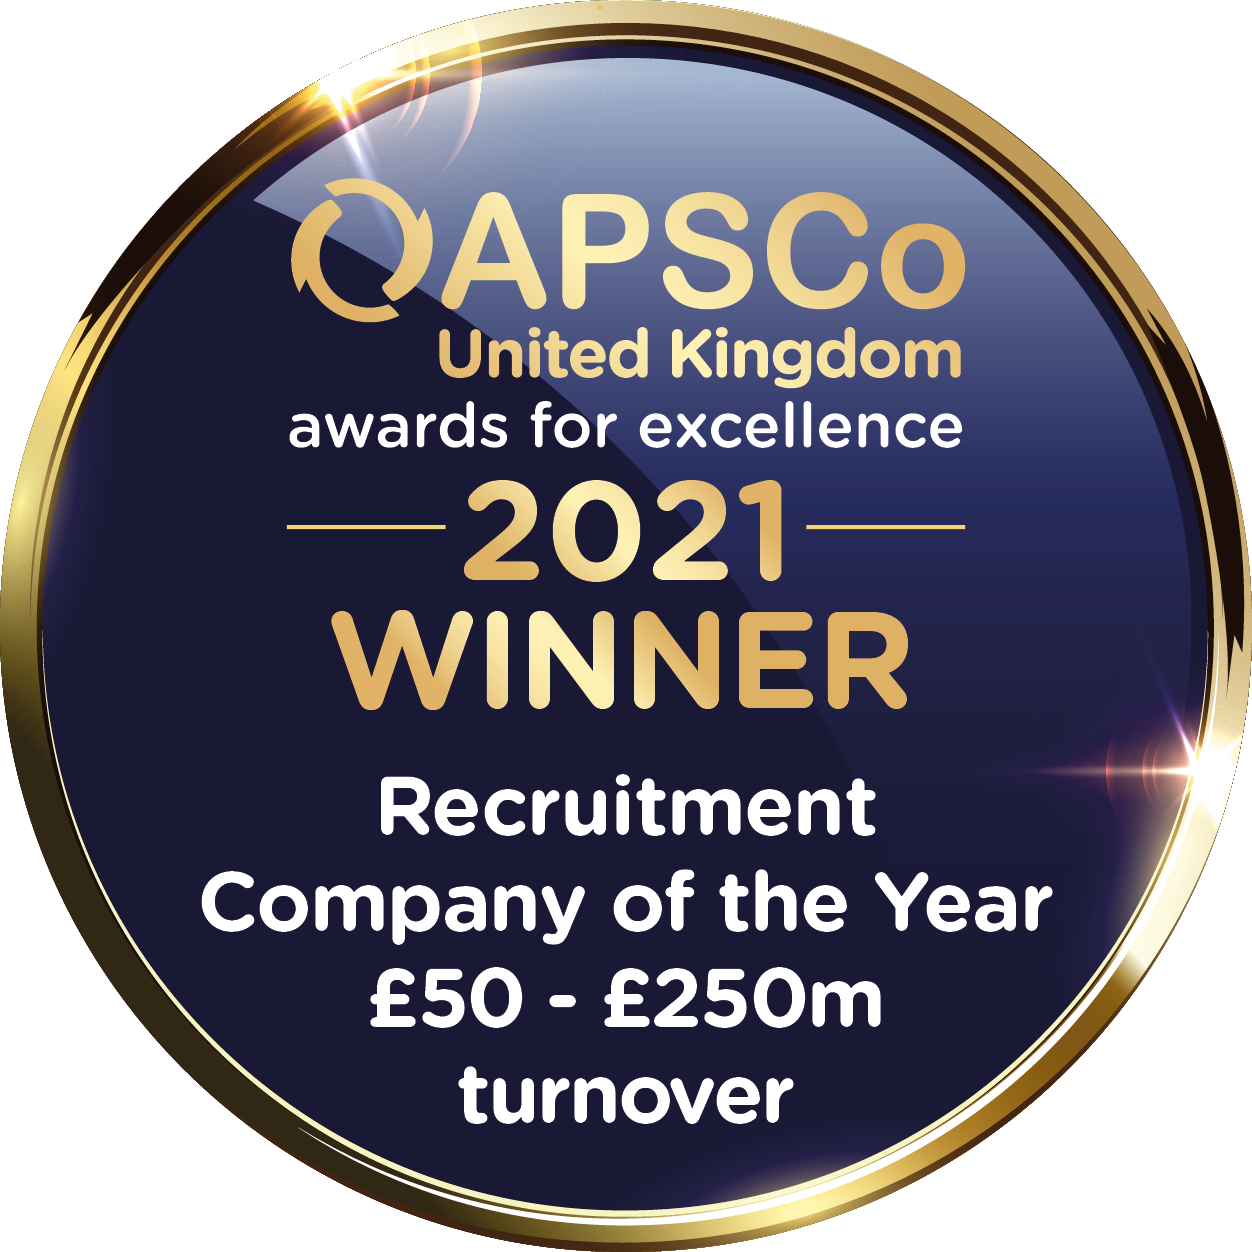 APSCo Recruitment Company with the ost sustainable growth (2019)